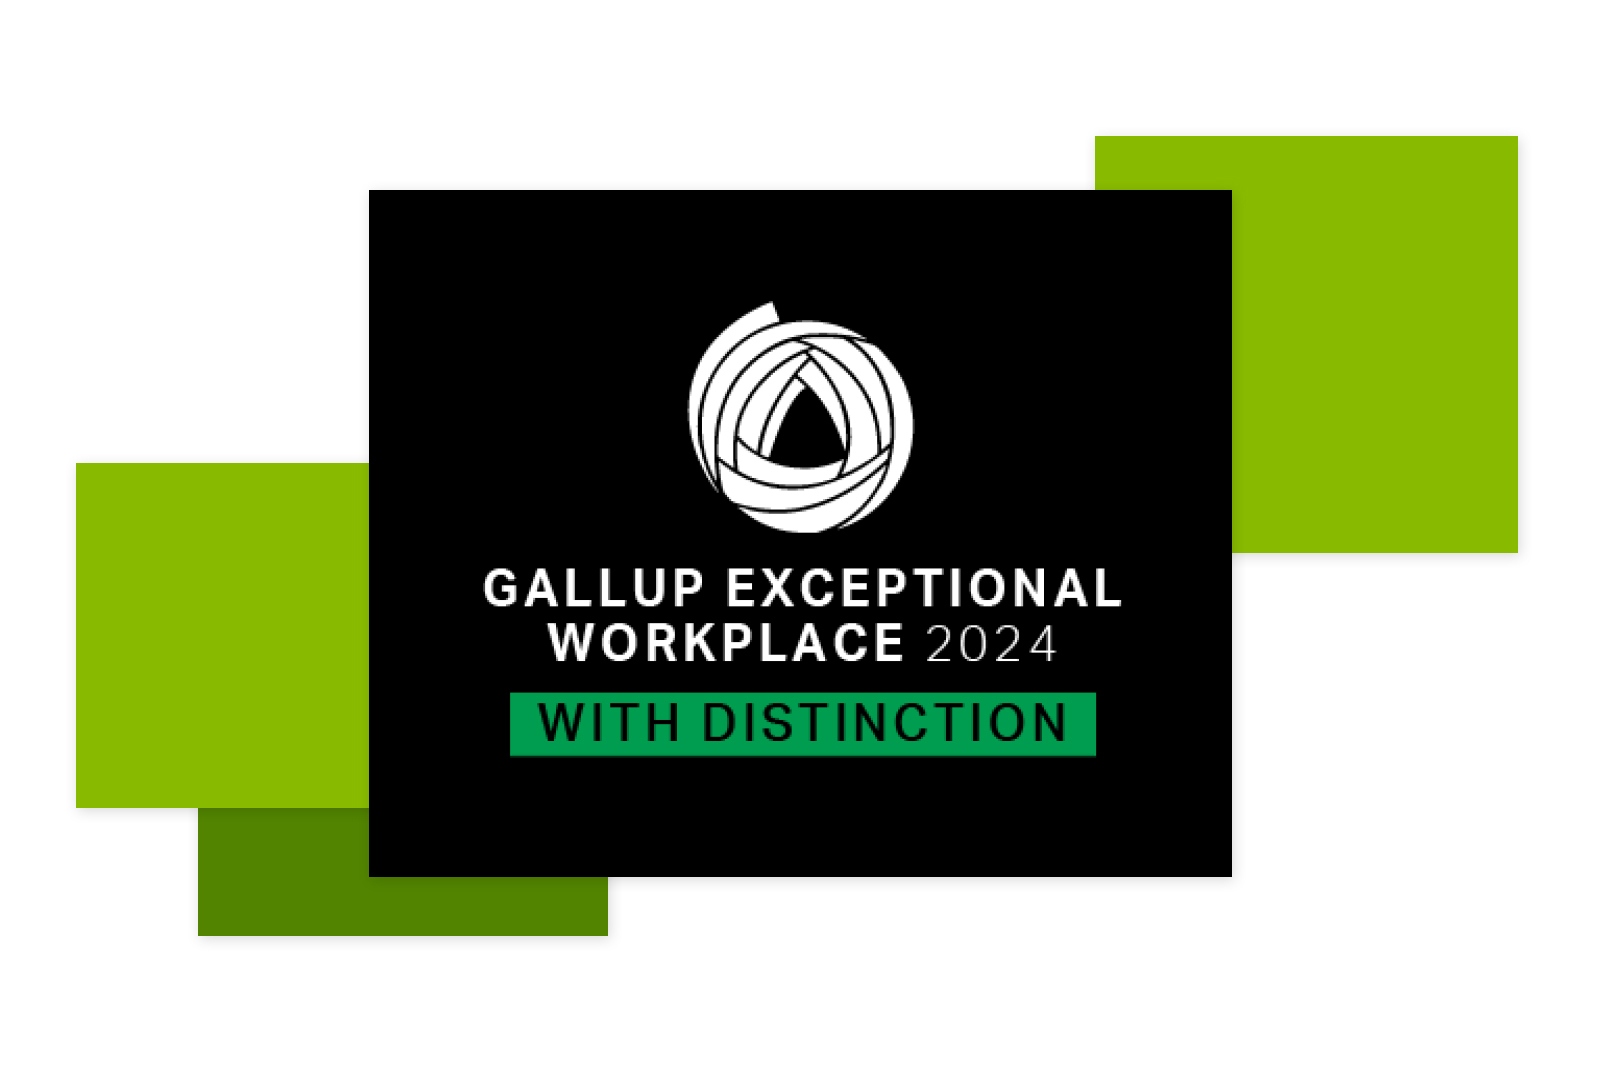 Gallup Exceptional Workplace with Distinction Award logo